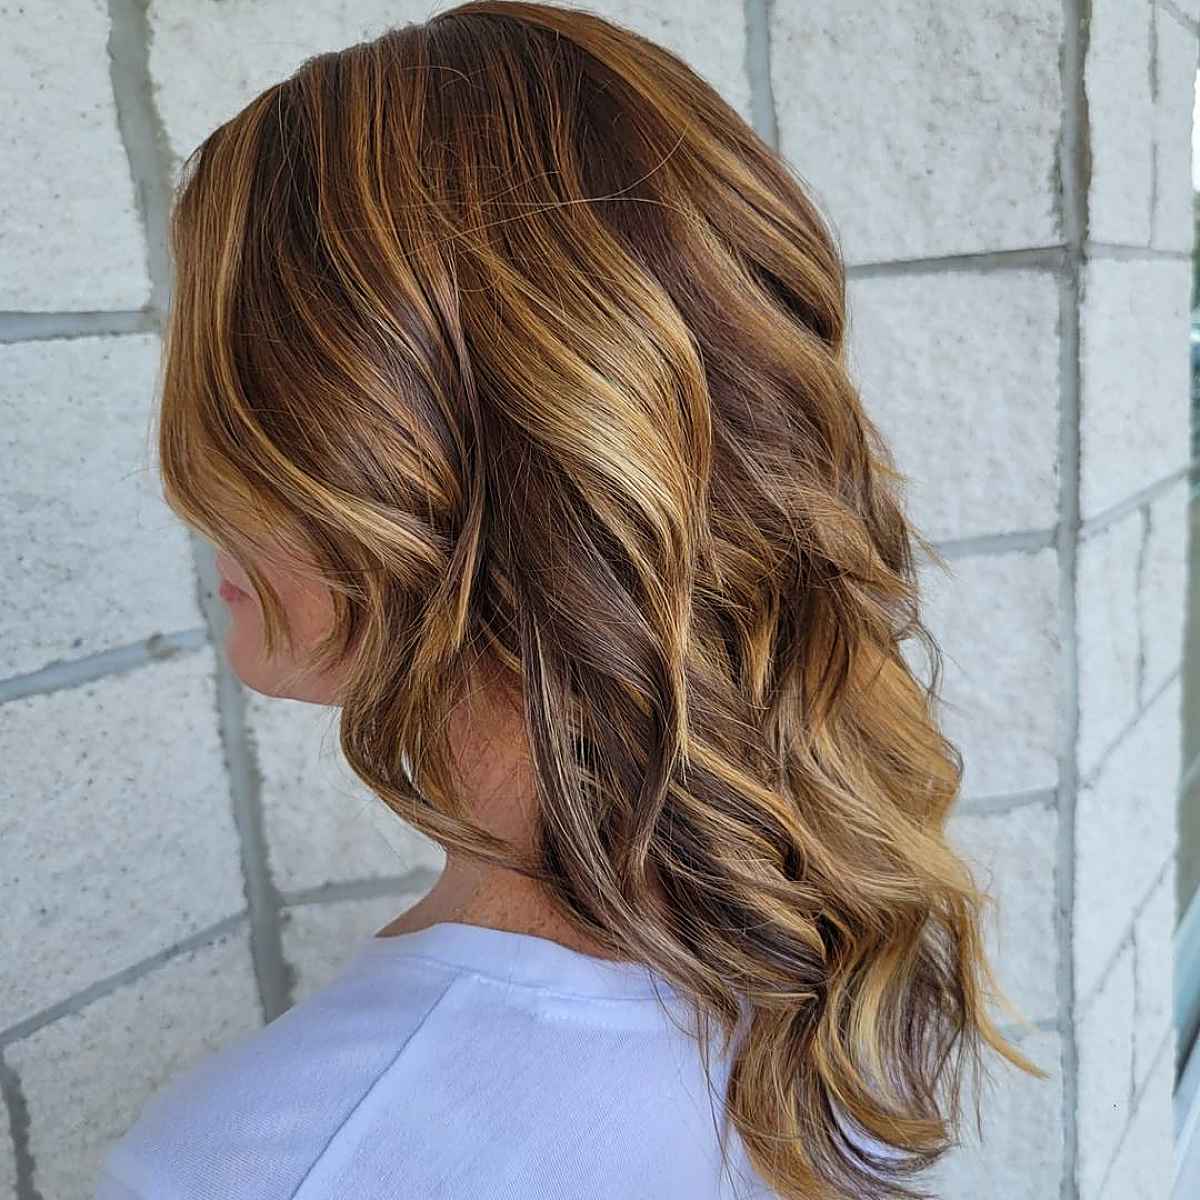 Bronde with warm-toned highlights